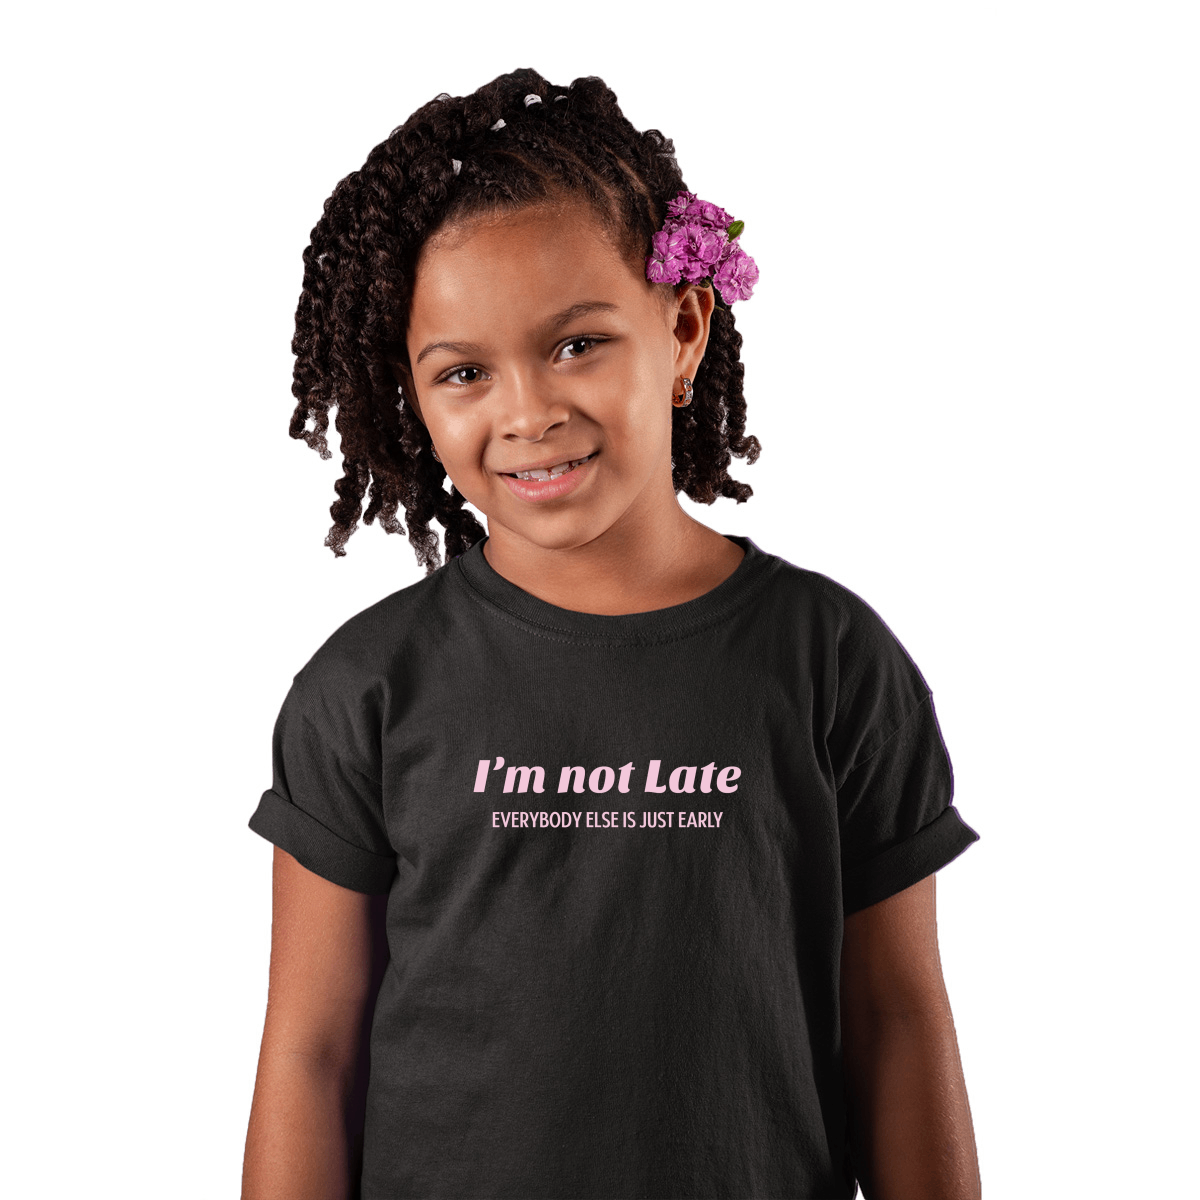 I’m not late everybody else is just early Kids T-shirt | Black